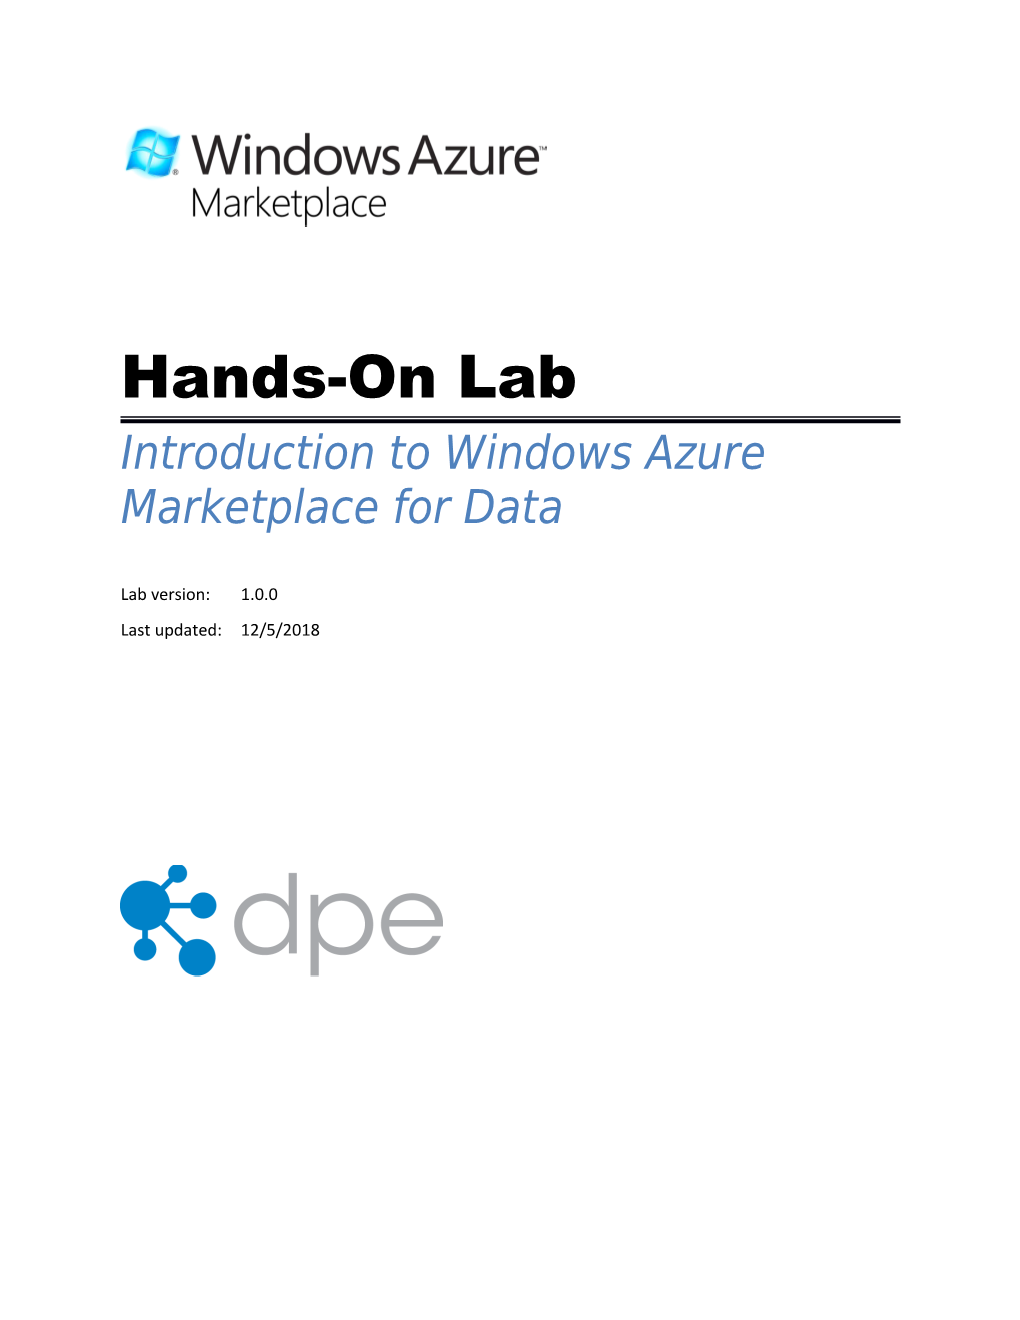 Introduction to Windows Azure Marketplace for Data